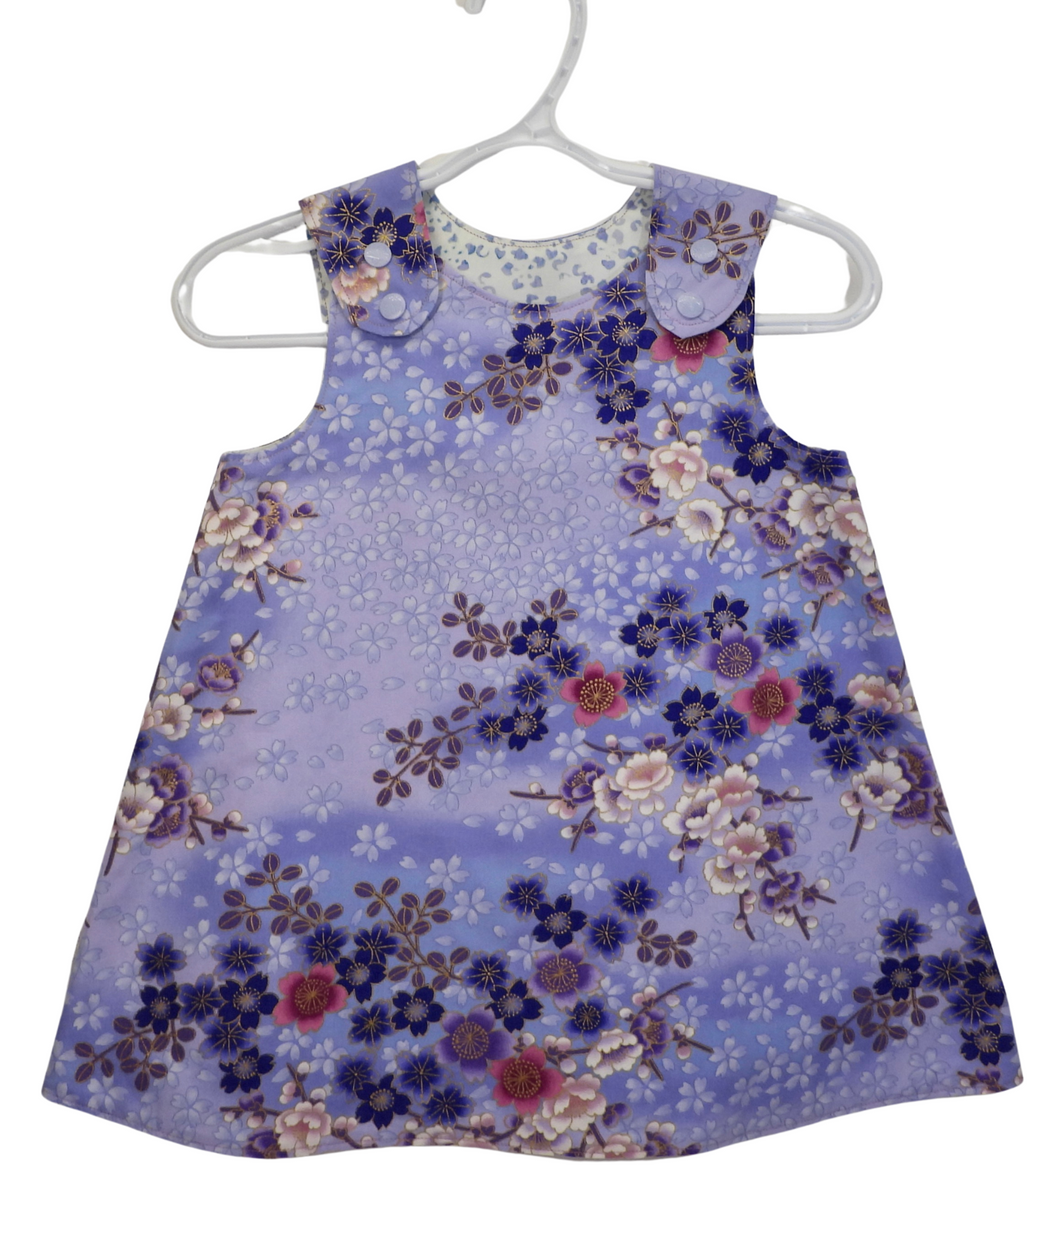 Baby Dress - Size 18 to 24 months - Purple Florals *